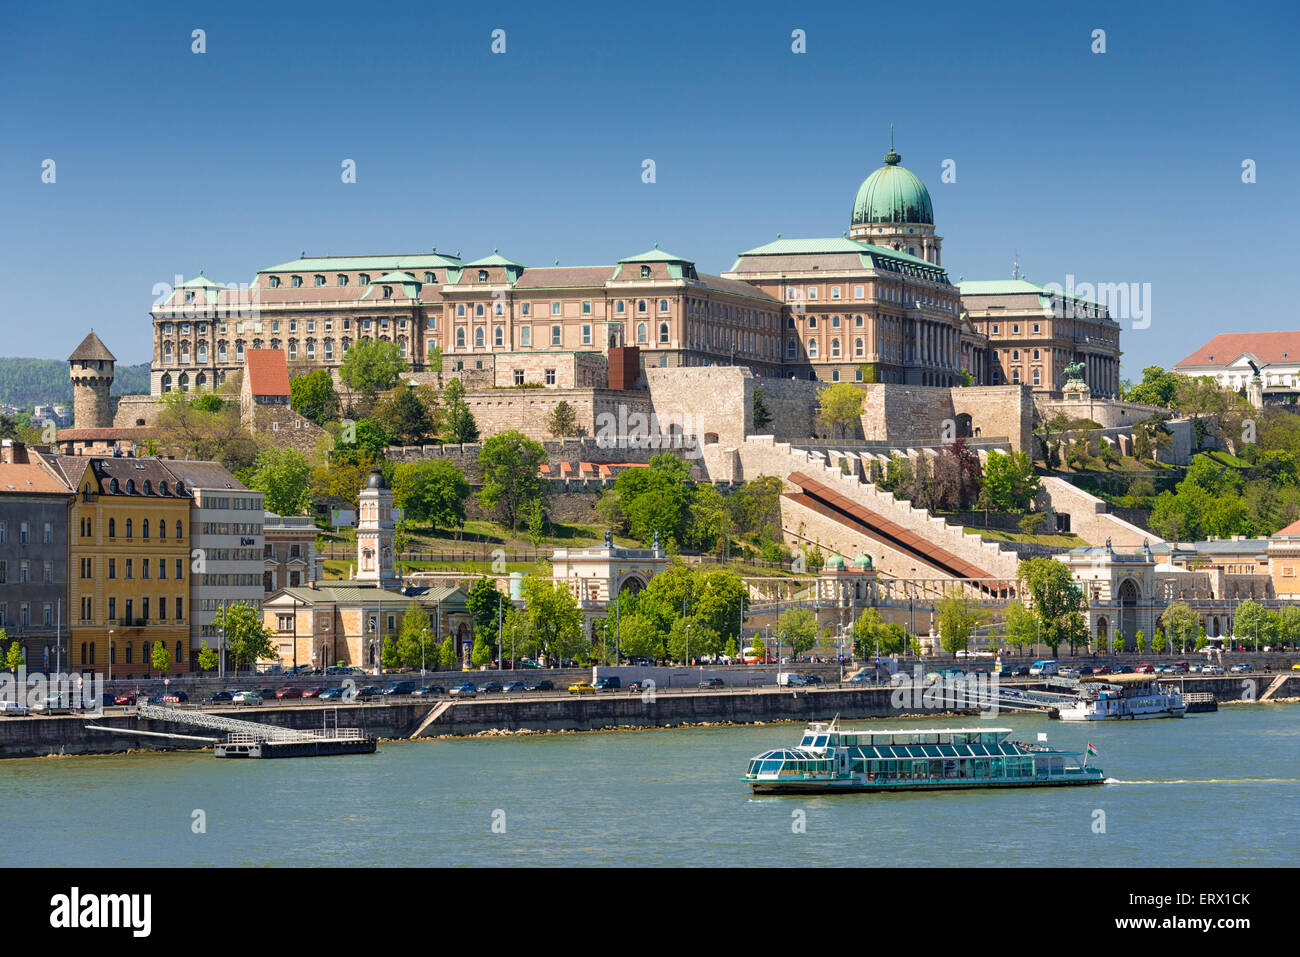 Castle Hill with Castle Palace, boat on the Danube, Budapest, Hungary Stock Photo